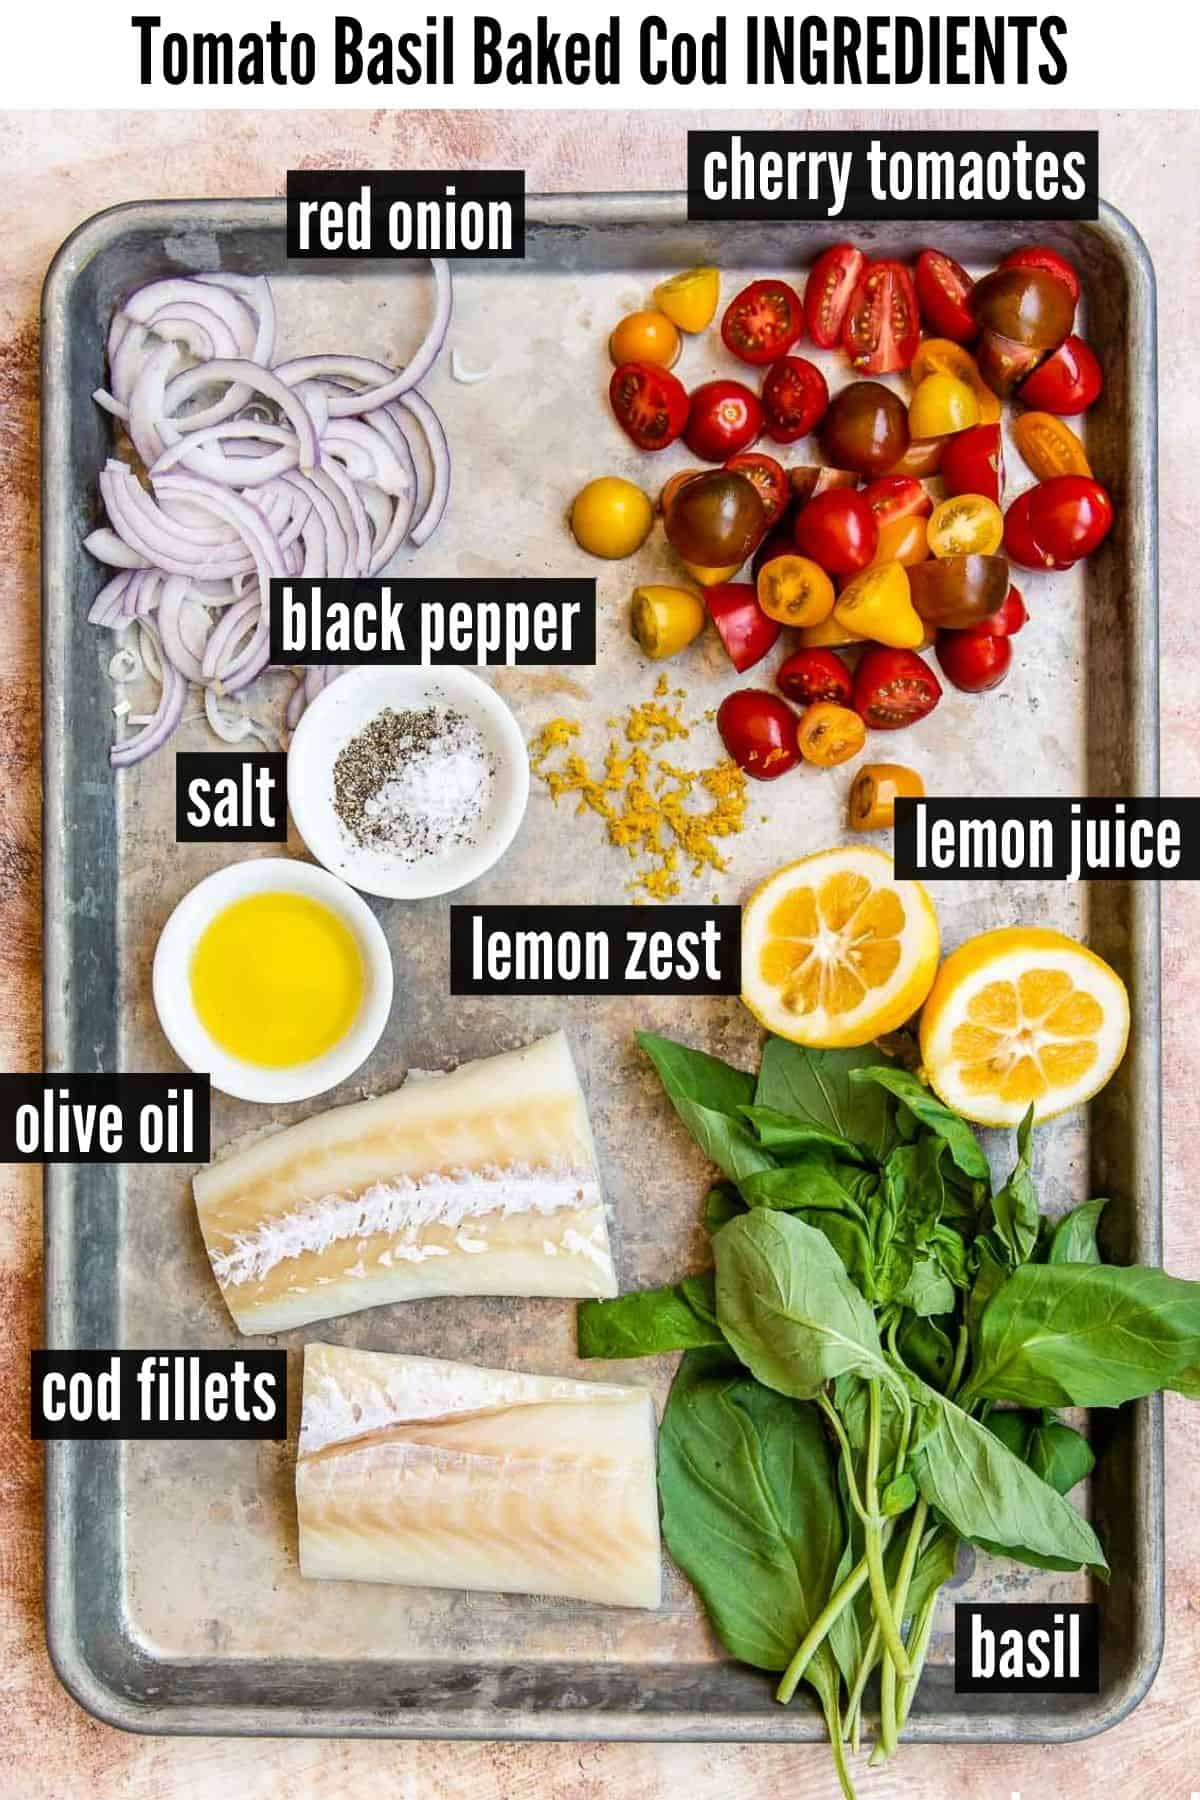 baked cod ingredients labeled